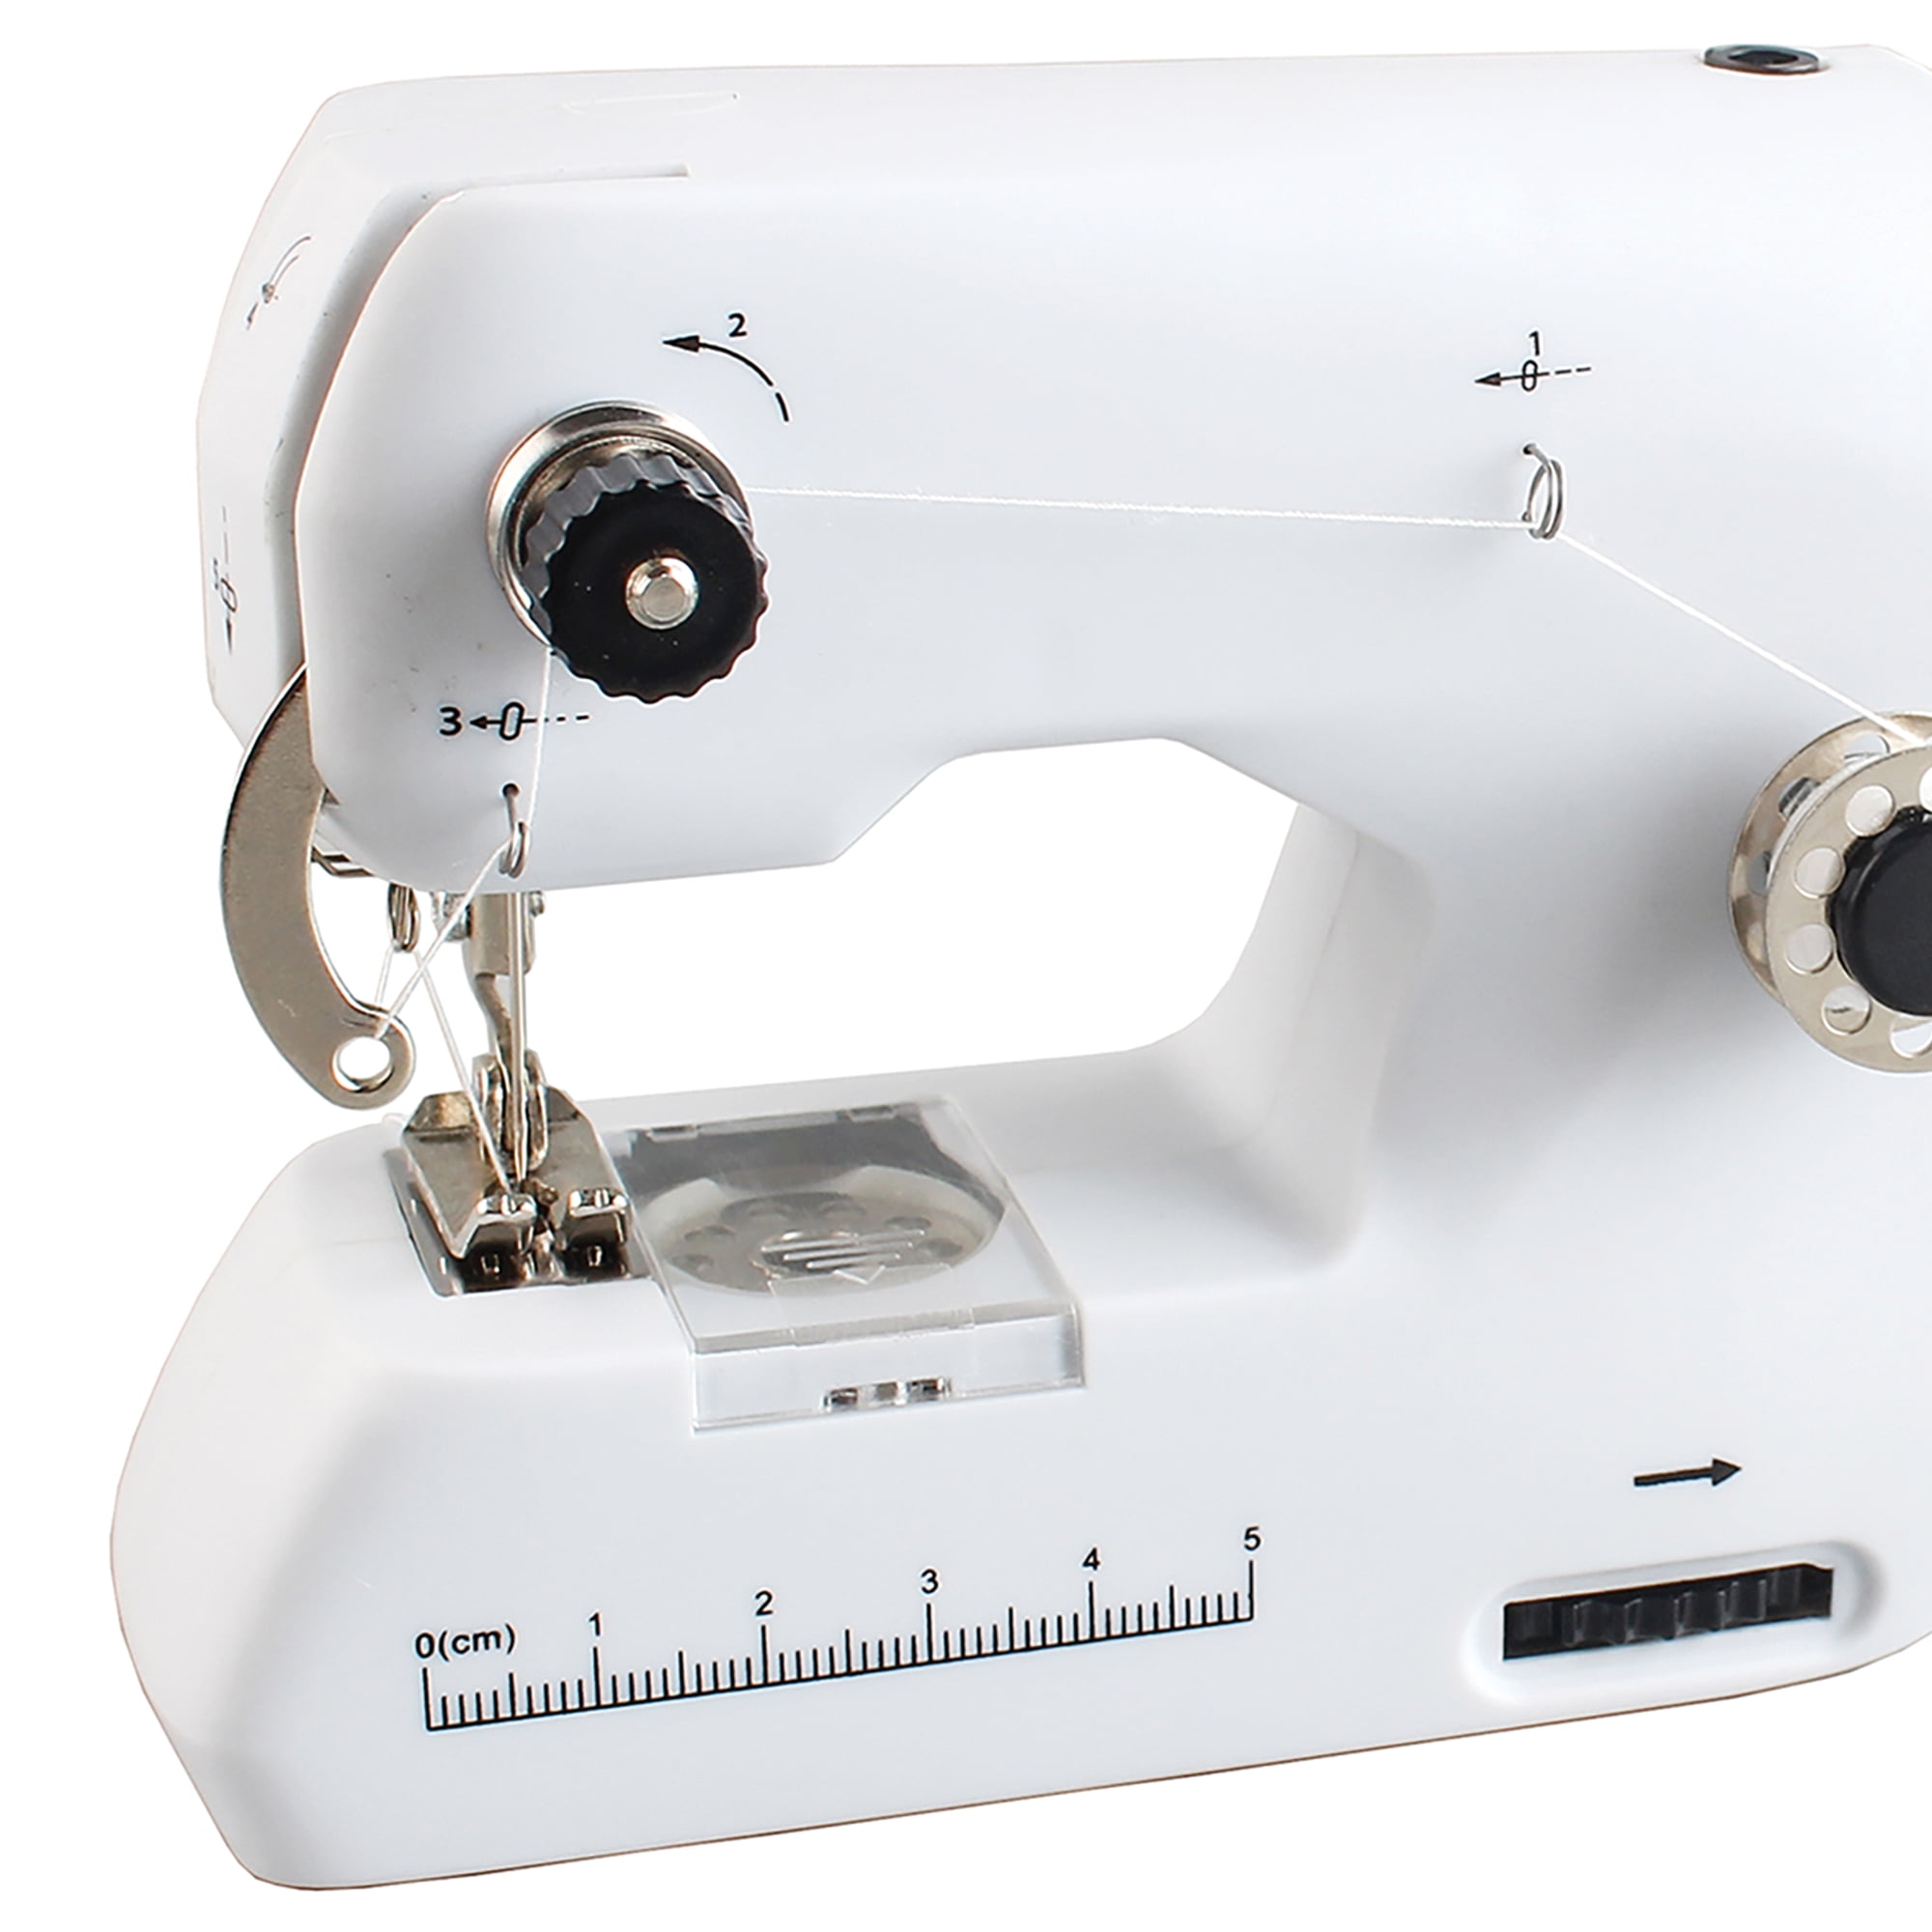 Compact Portable Sewing Machine - Family Sew #FS-30H